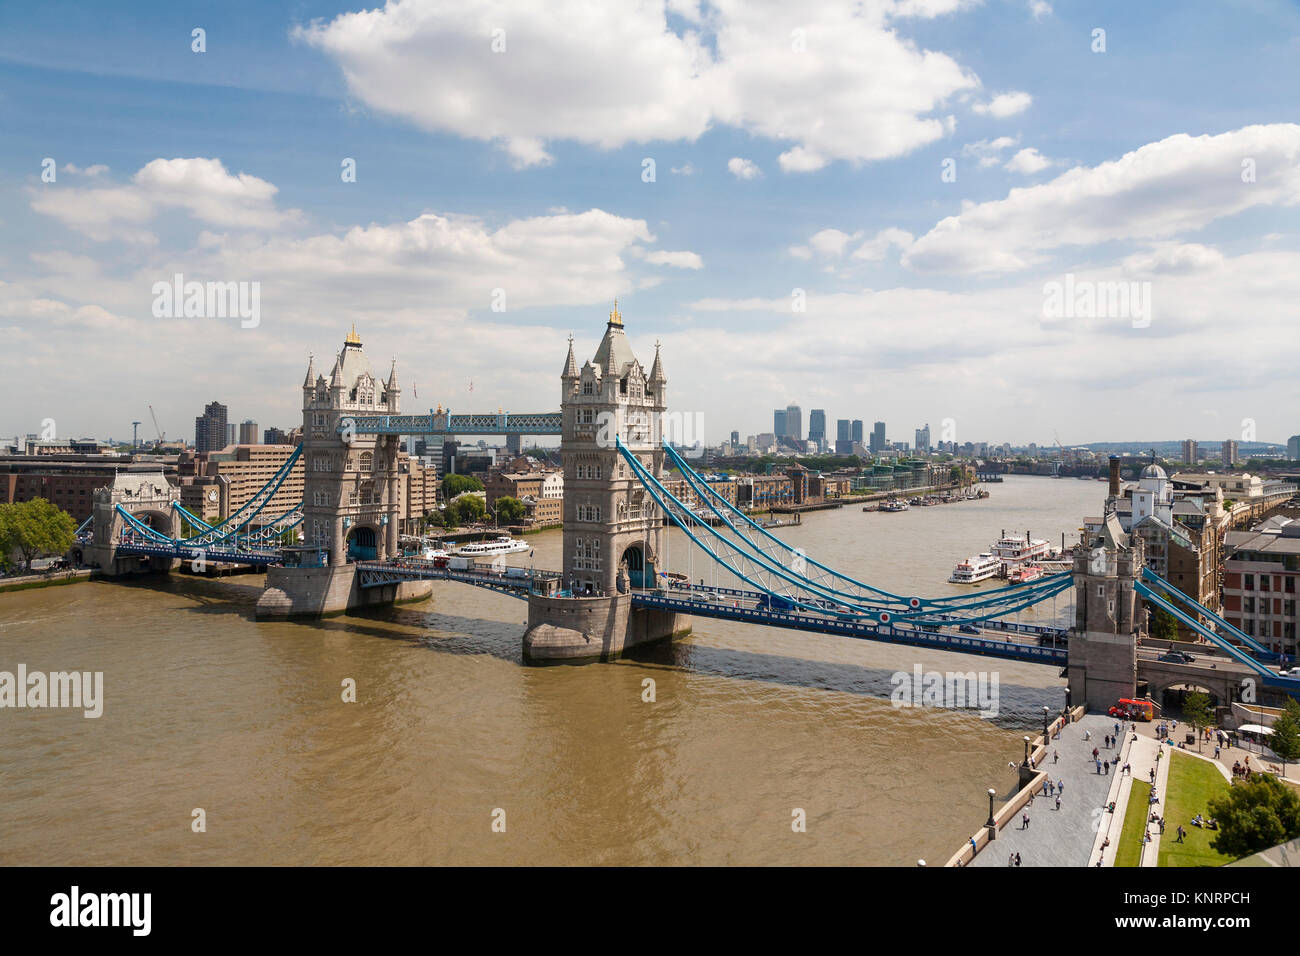 High viewpoint of Tower Bridge, the River Thames and East London, England. Stock Photo